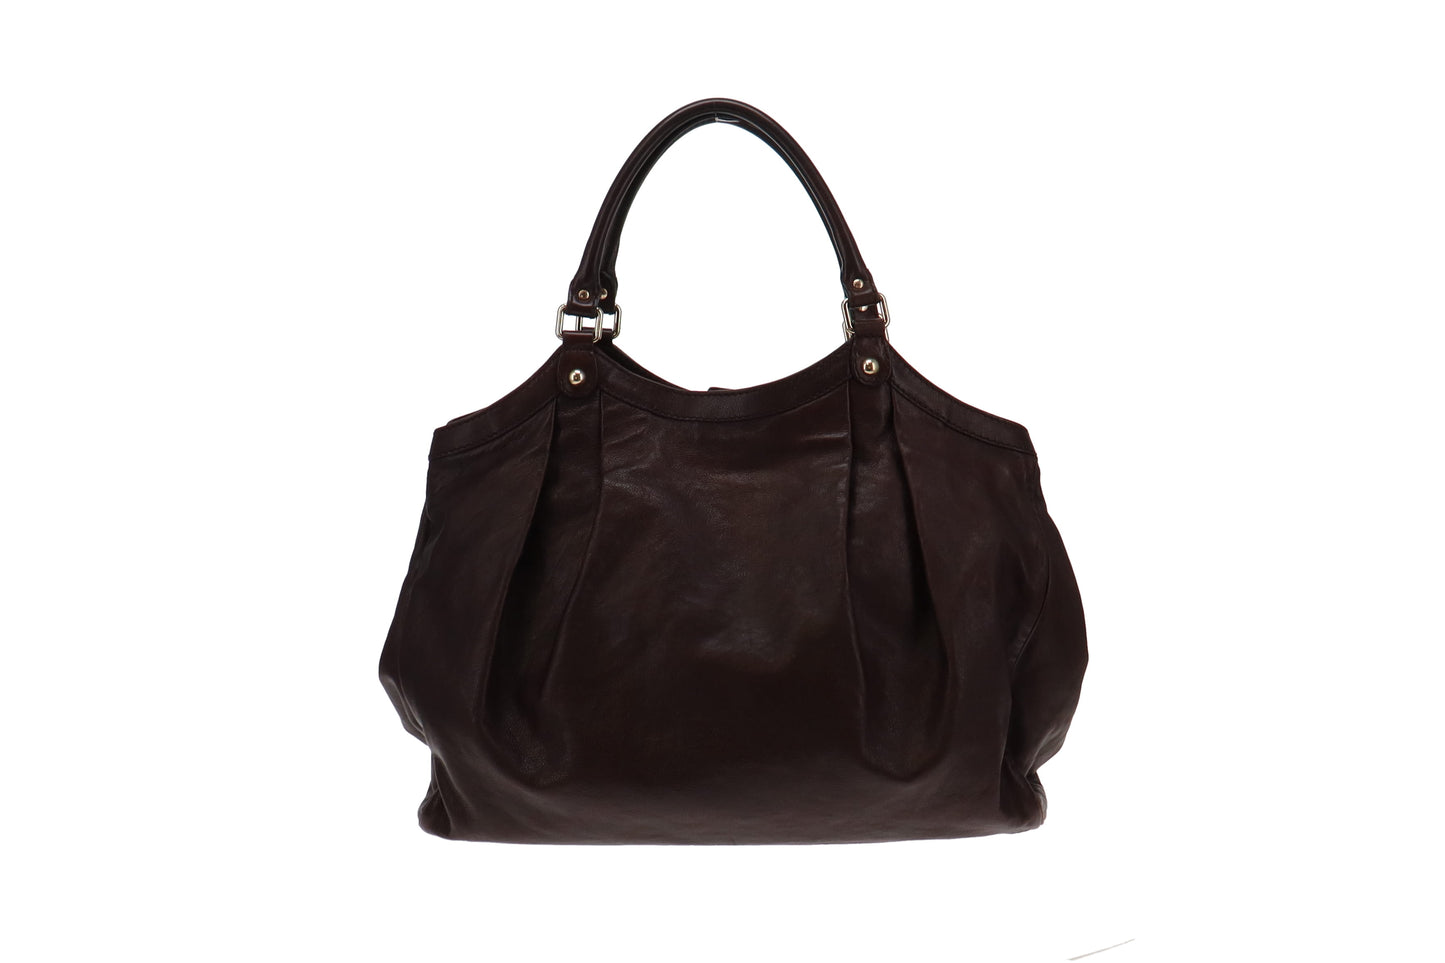 Gucci Dark Brown Leather Large Sukey Hobo